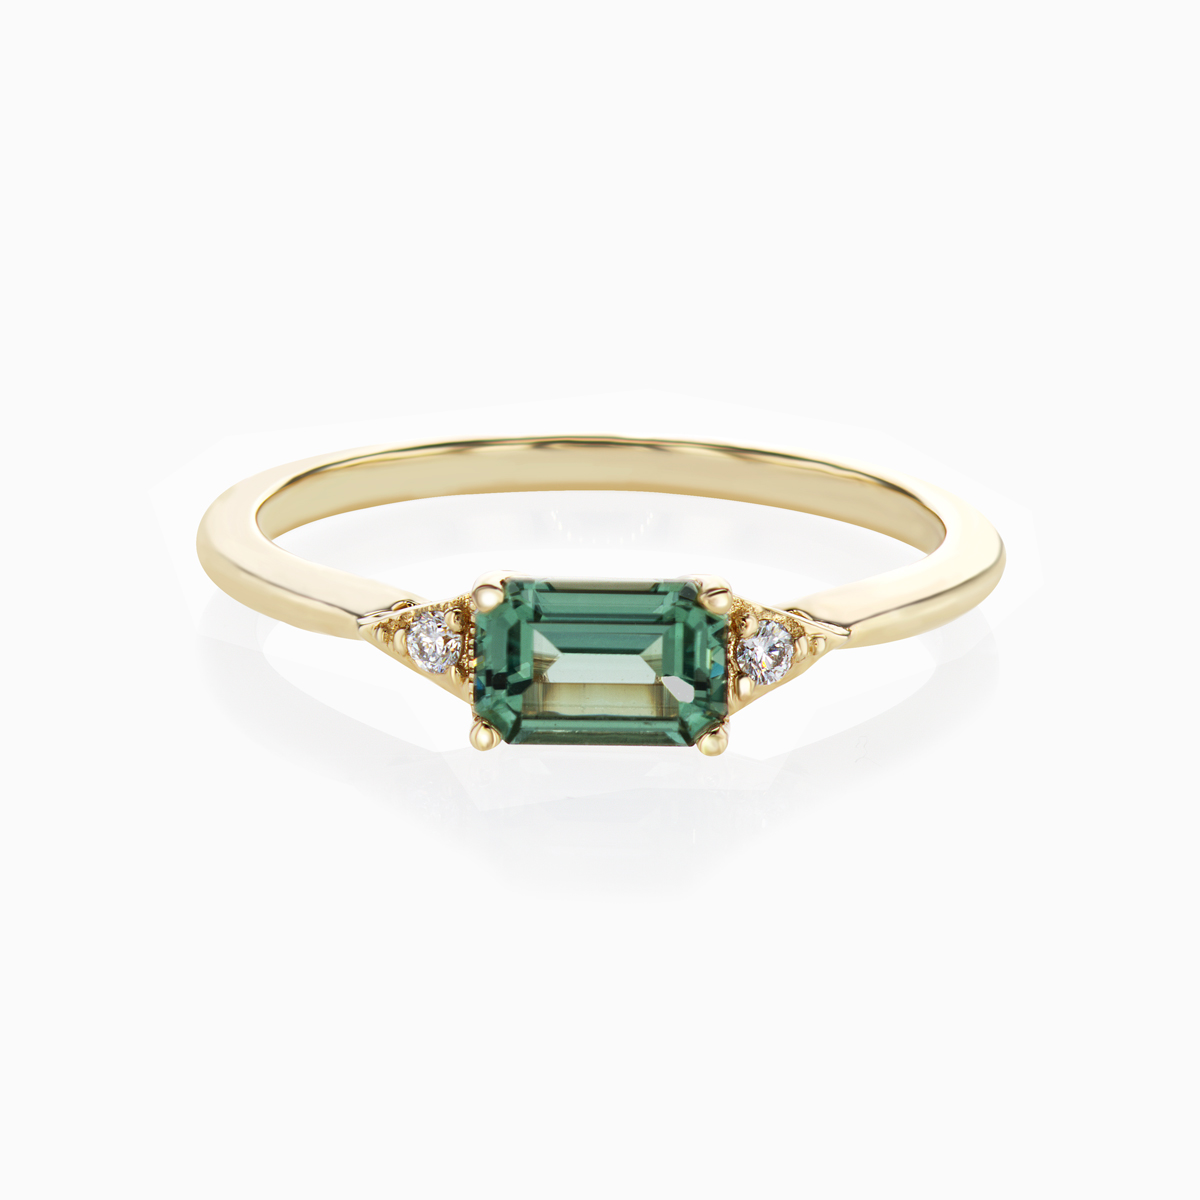 Minimalist Lab-grown Teal Sapphire and Diamond Engagement Ring